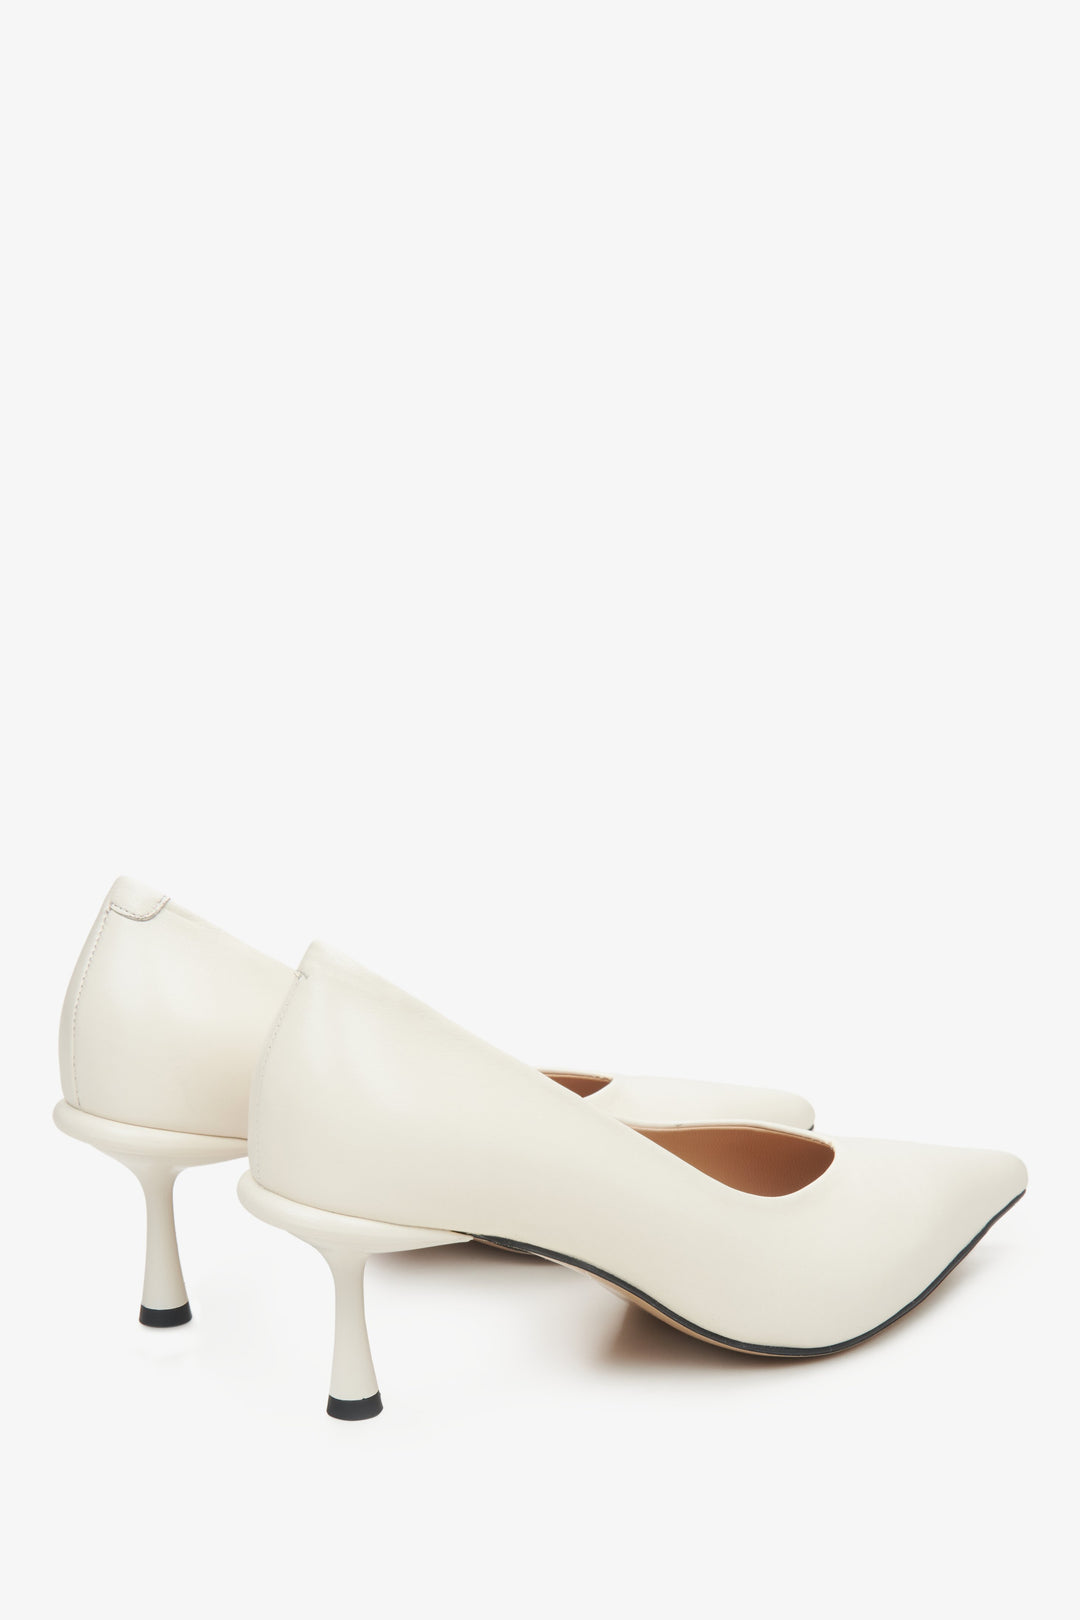 Leather milk-beige Estro pumps - close-up on the heel counter and side line of the shoe.